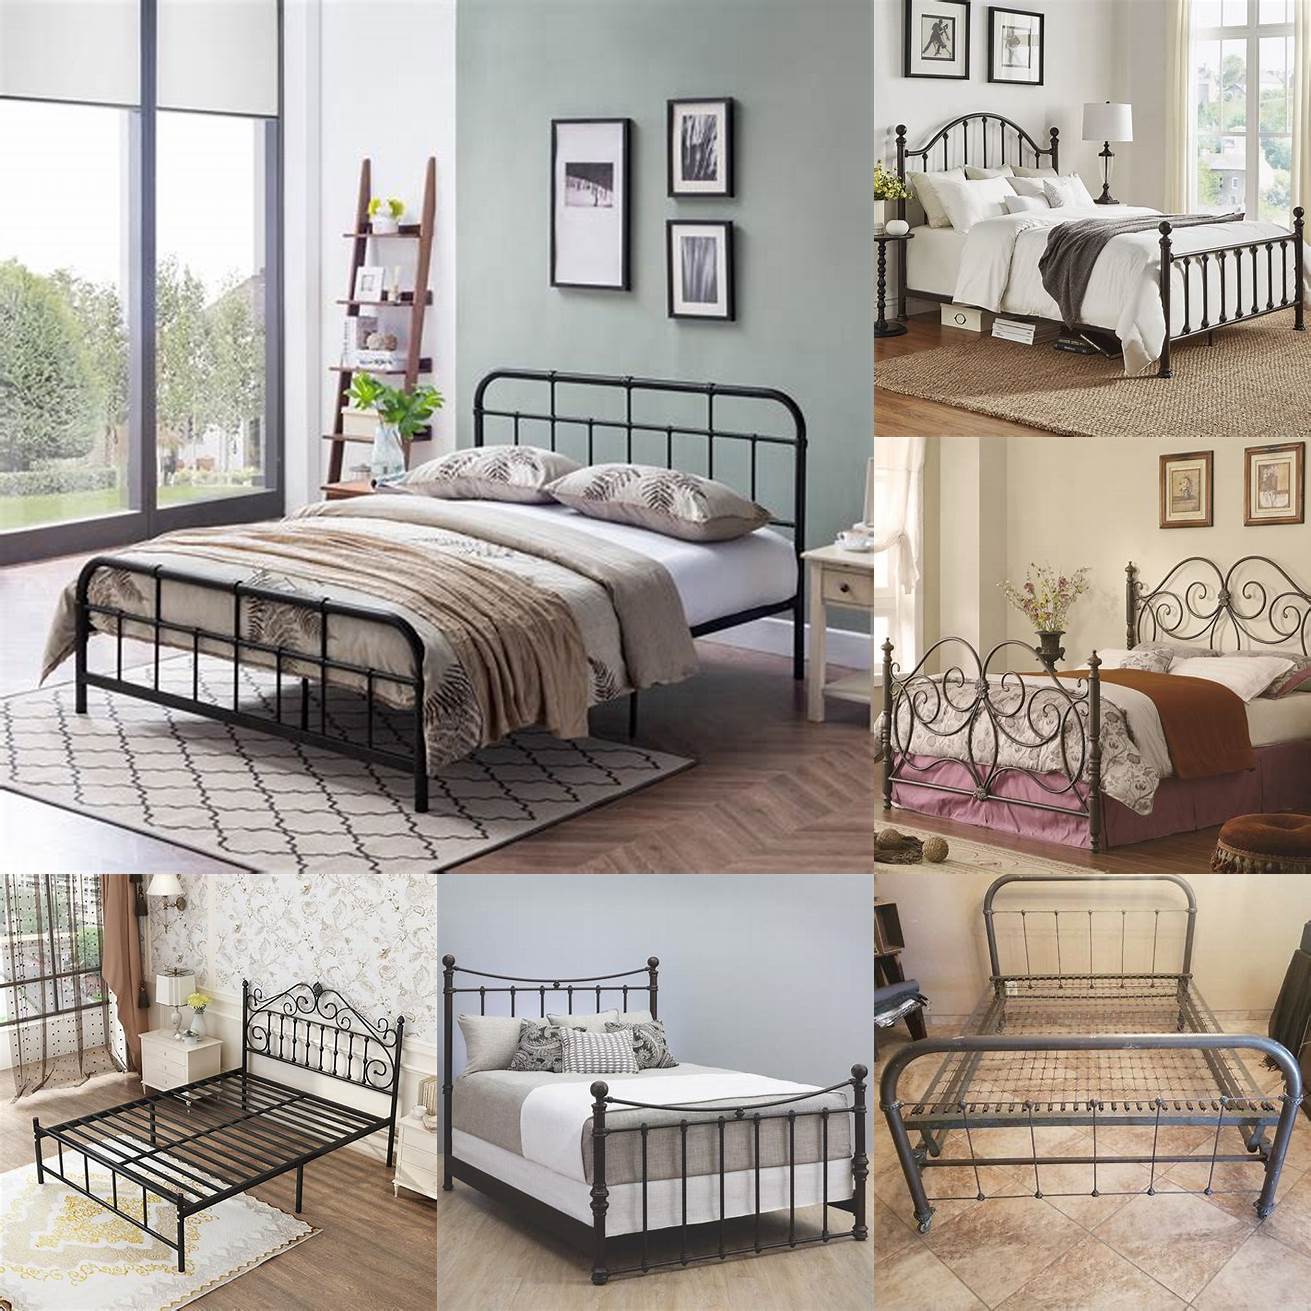 Value Iron bed frames offer great value for your money